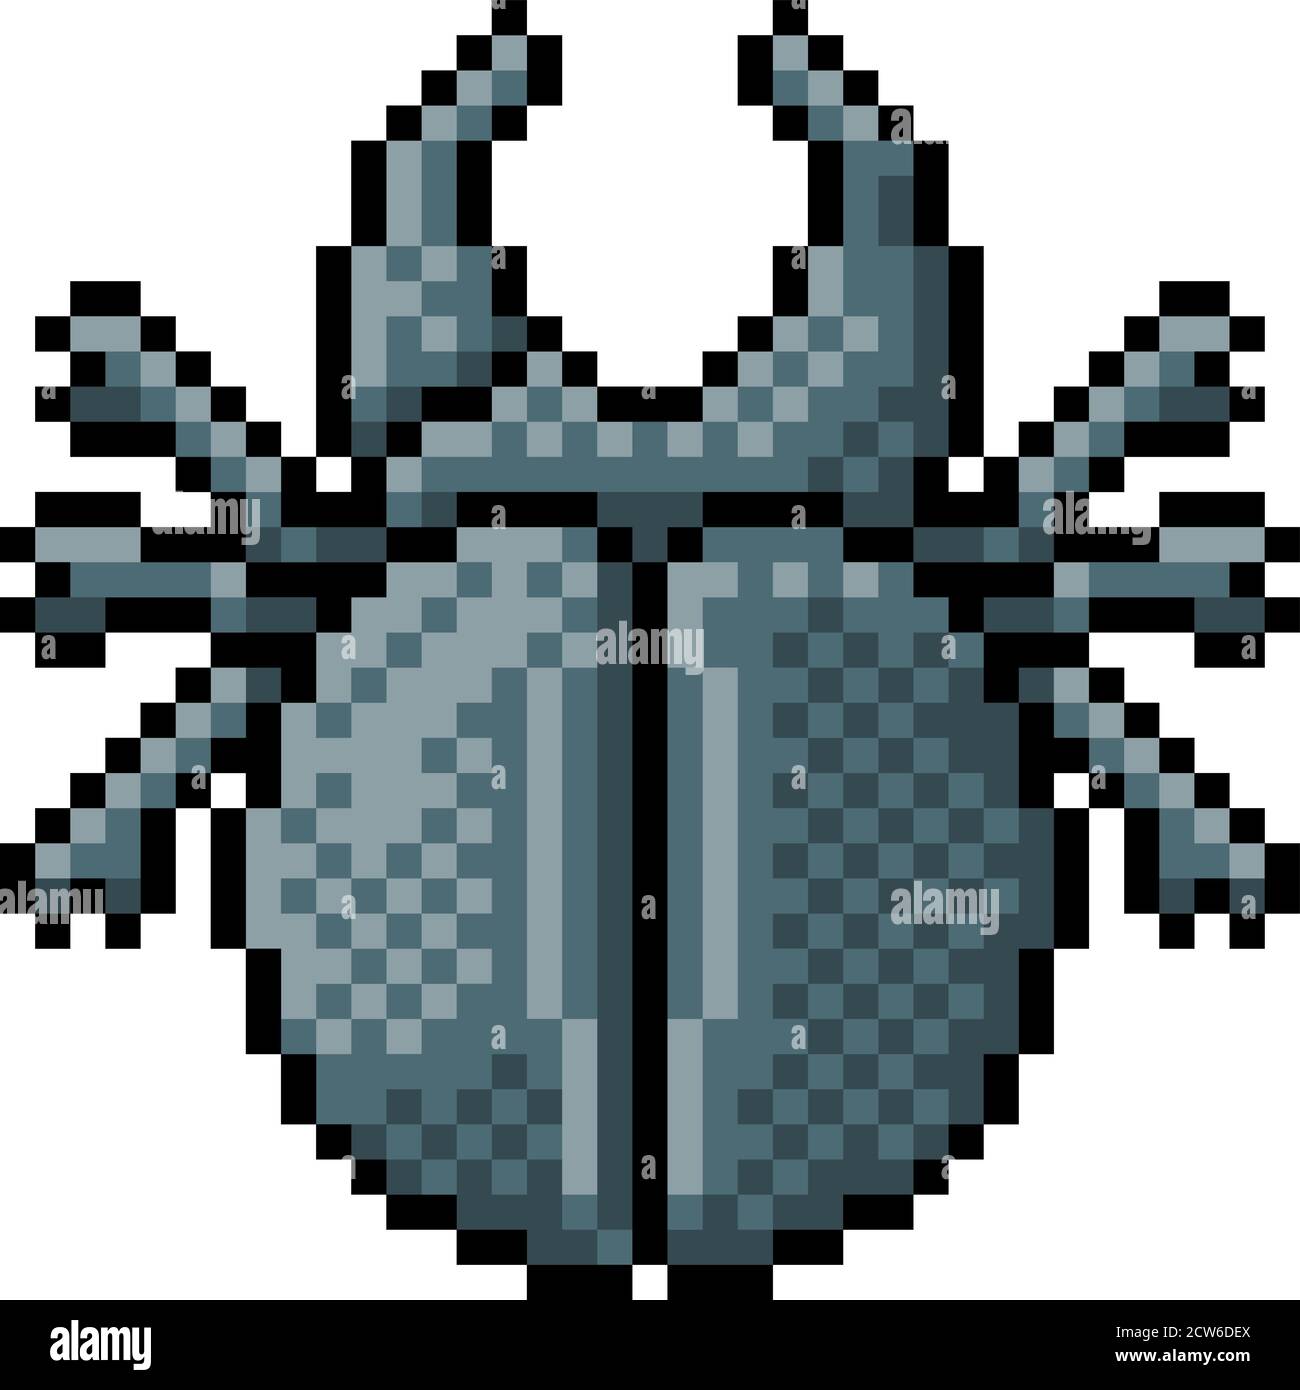 Beetle Bug Insect Pixel Art Video Game 8 Bit Icon Stock Vector